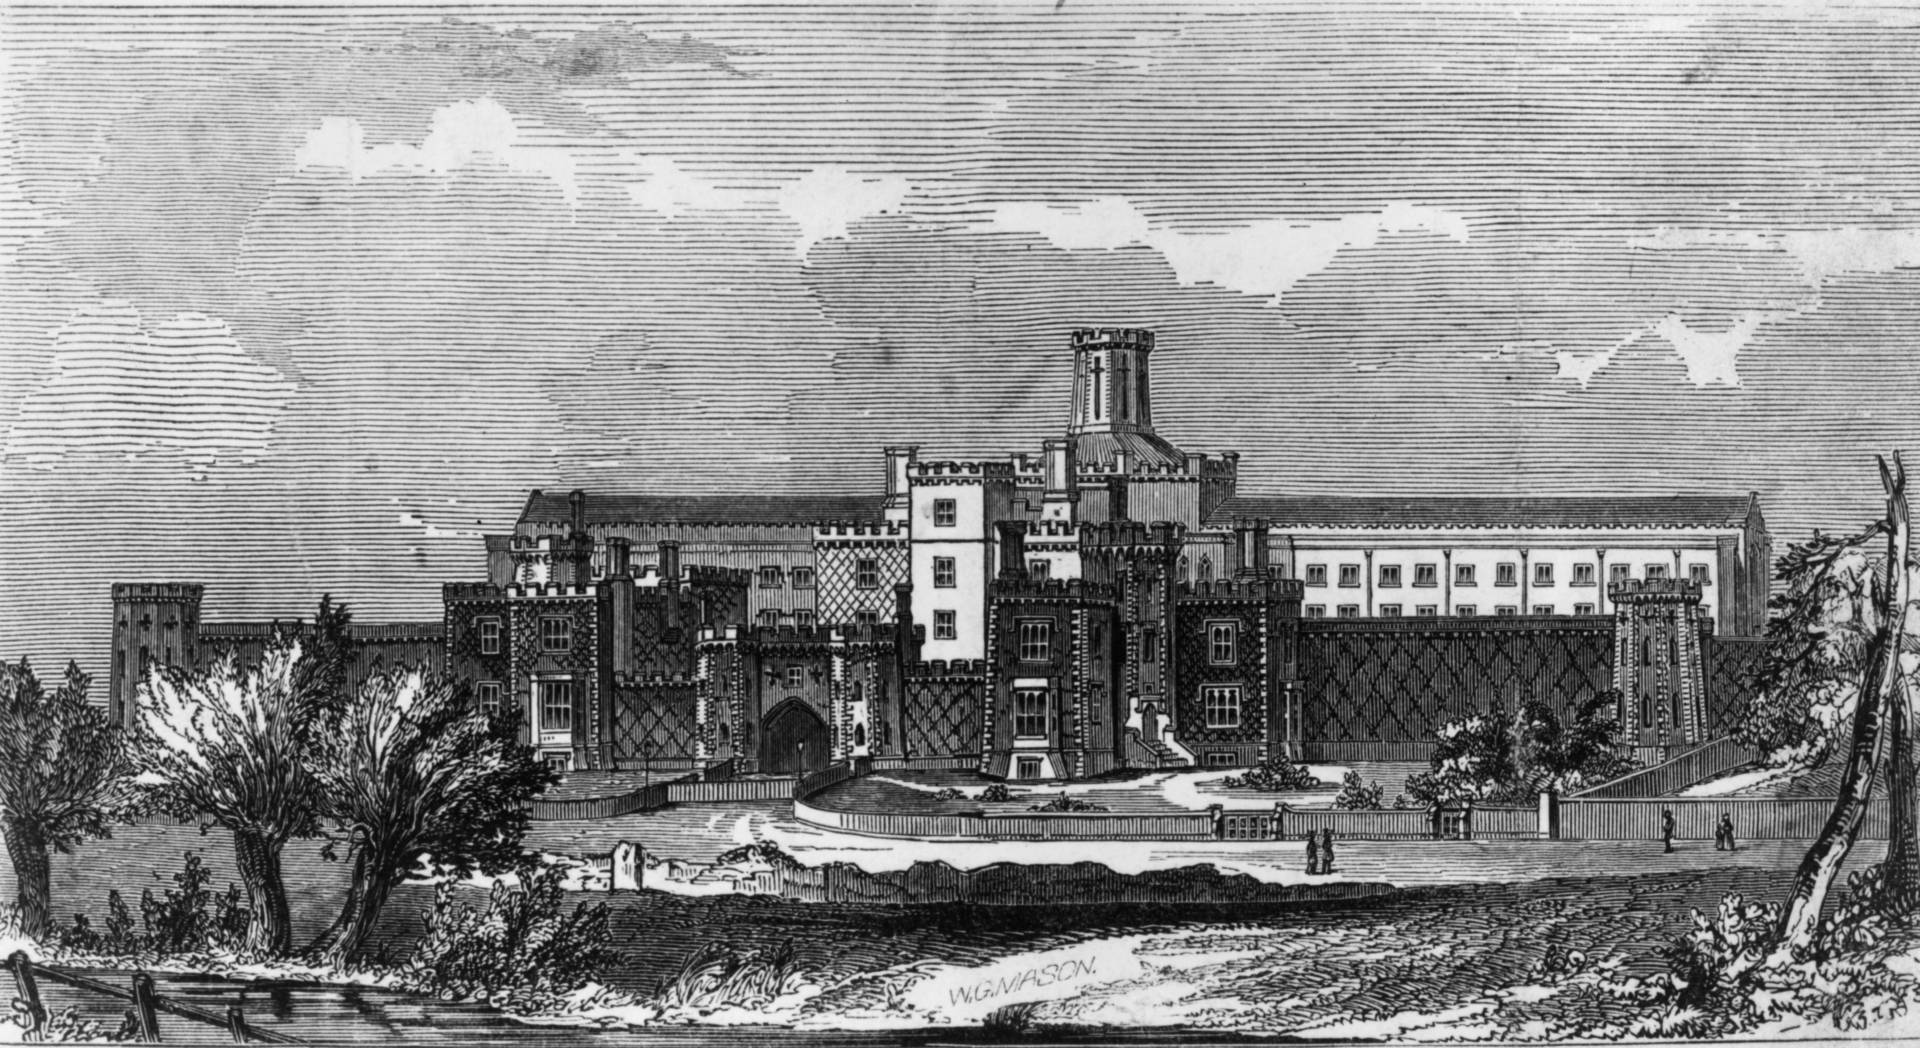 The Reading Prison was immortalized in Oscar Wilde's 1897 poem "The Ballad of Reading Gaol." Built in the mid 1800s, it remained operational until 2013. Photo: Hulton Archive/Getty Images